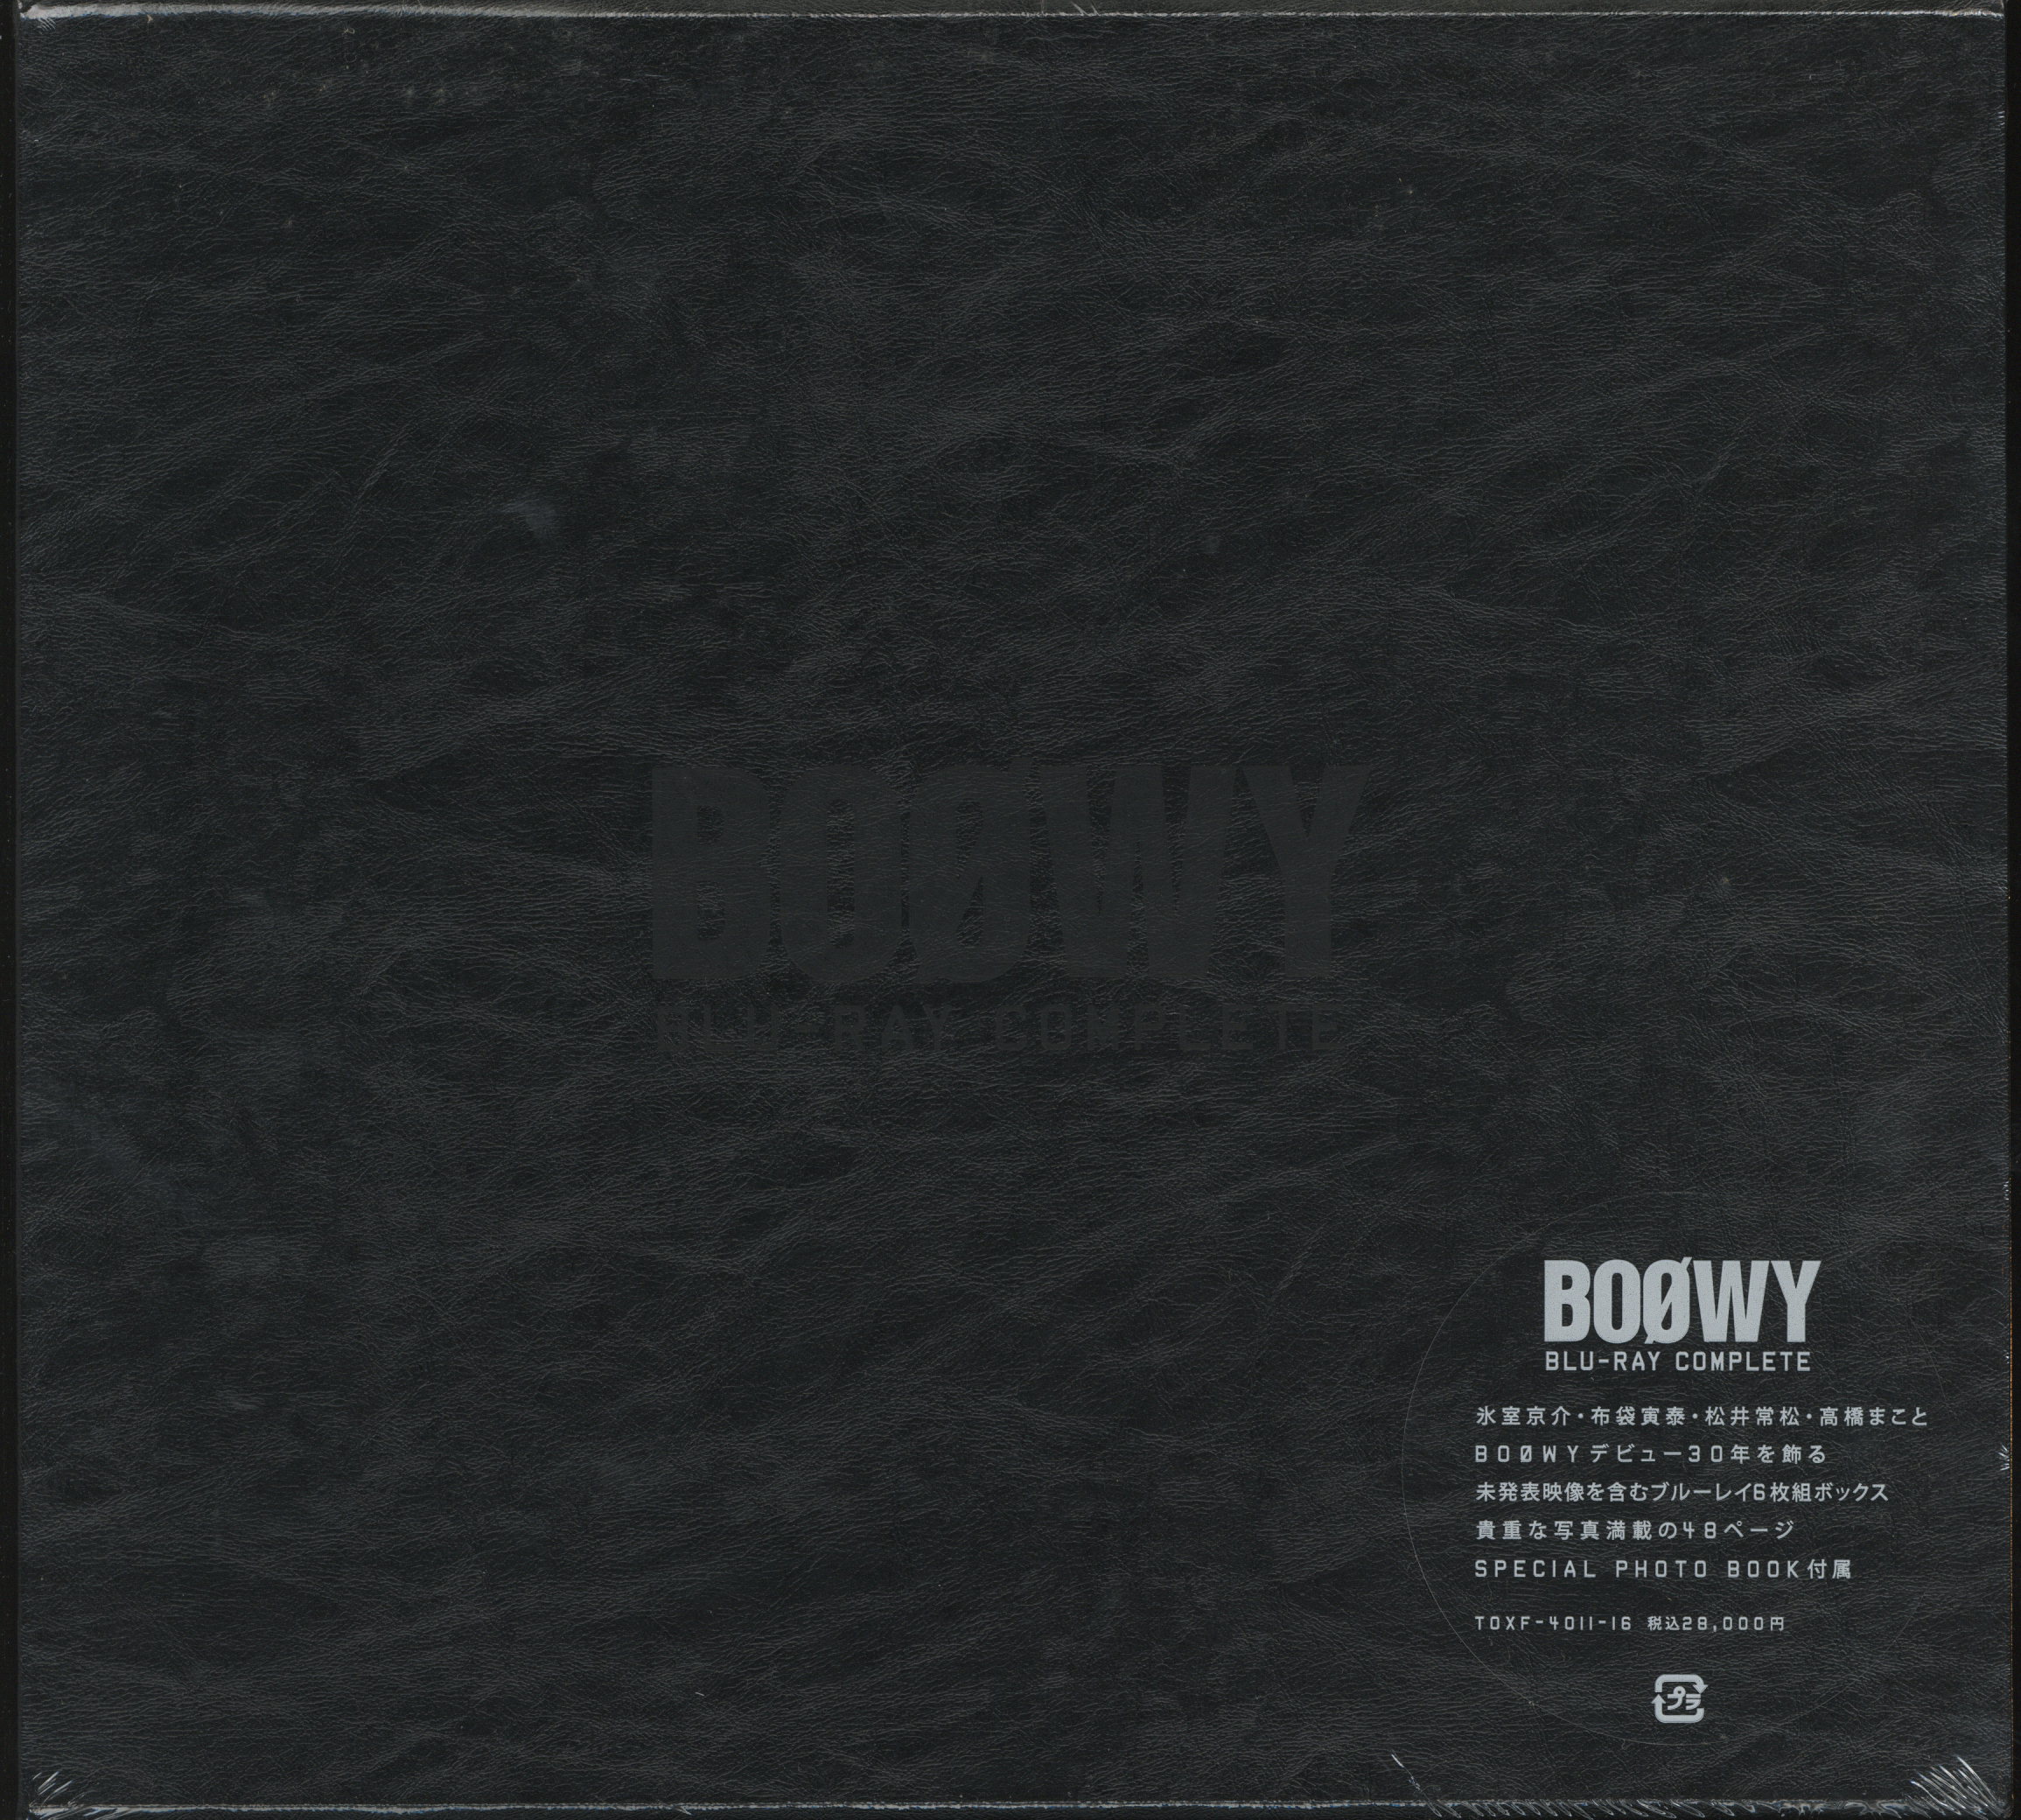 BOOWY Blu-ray complete-